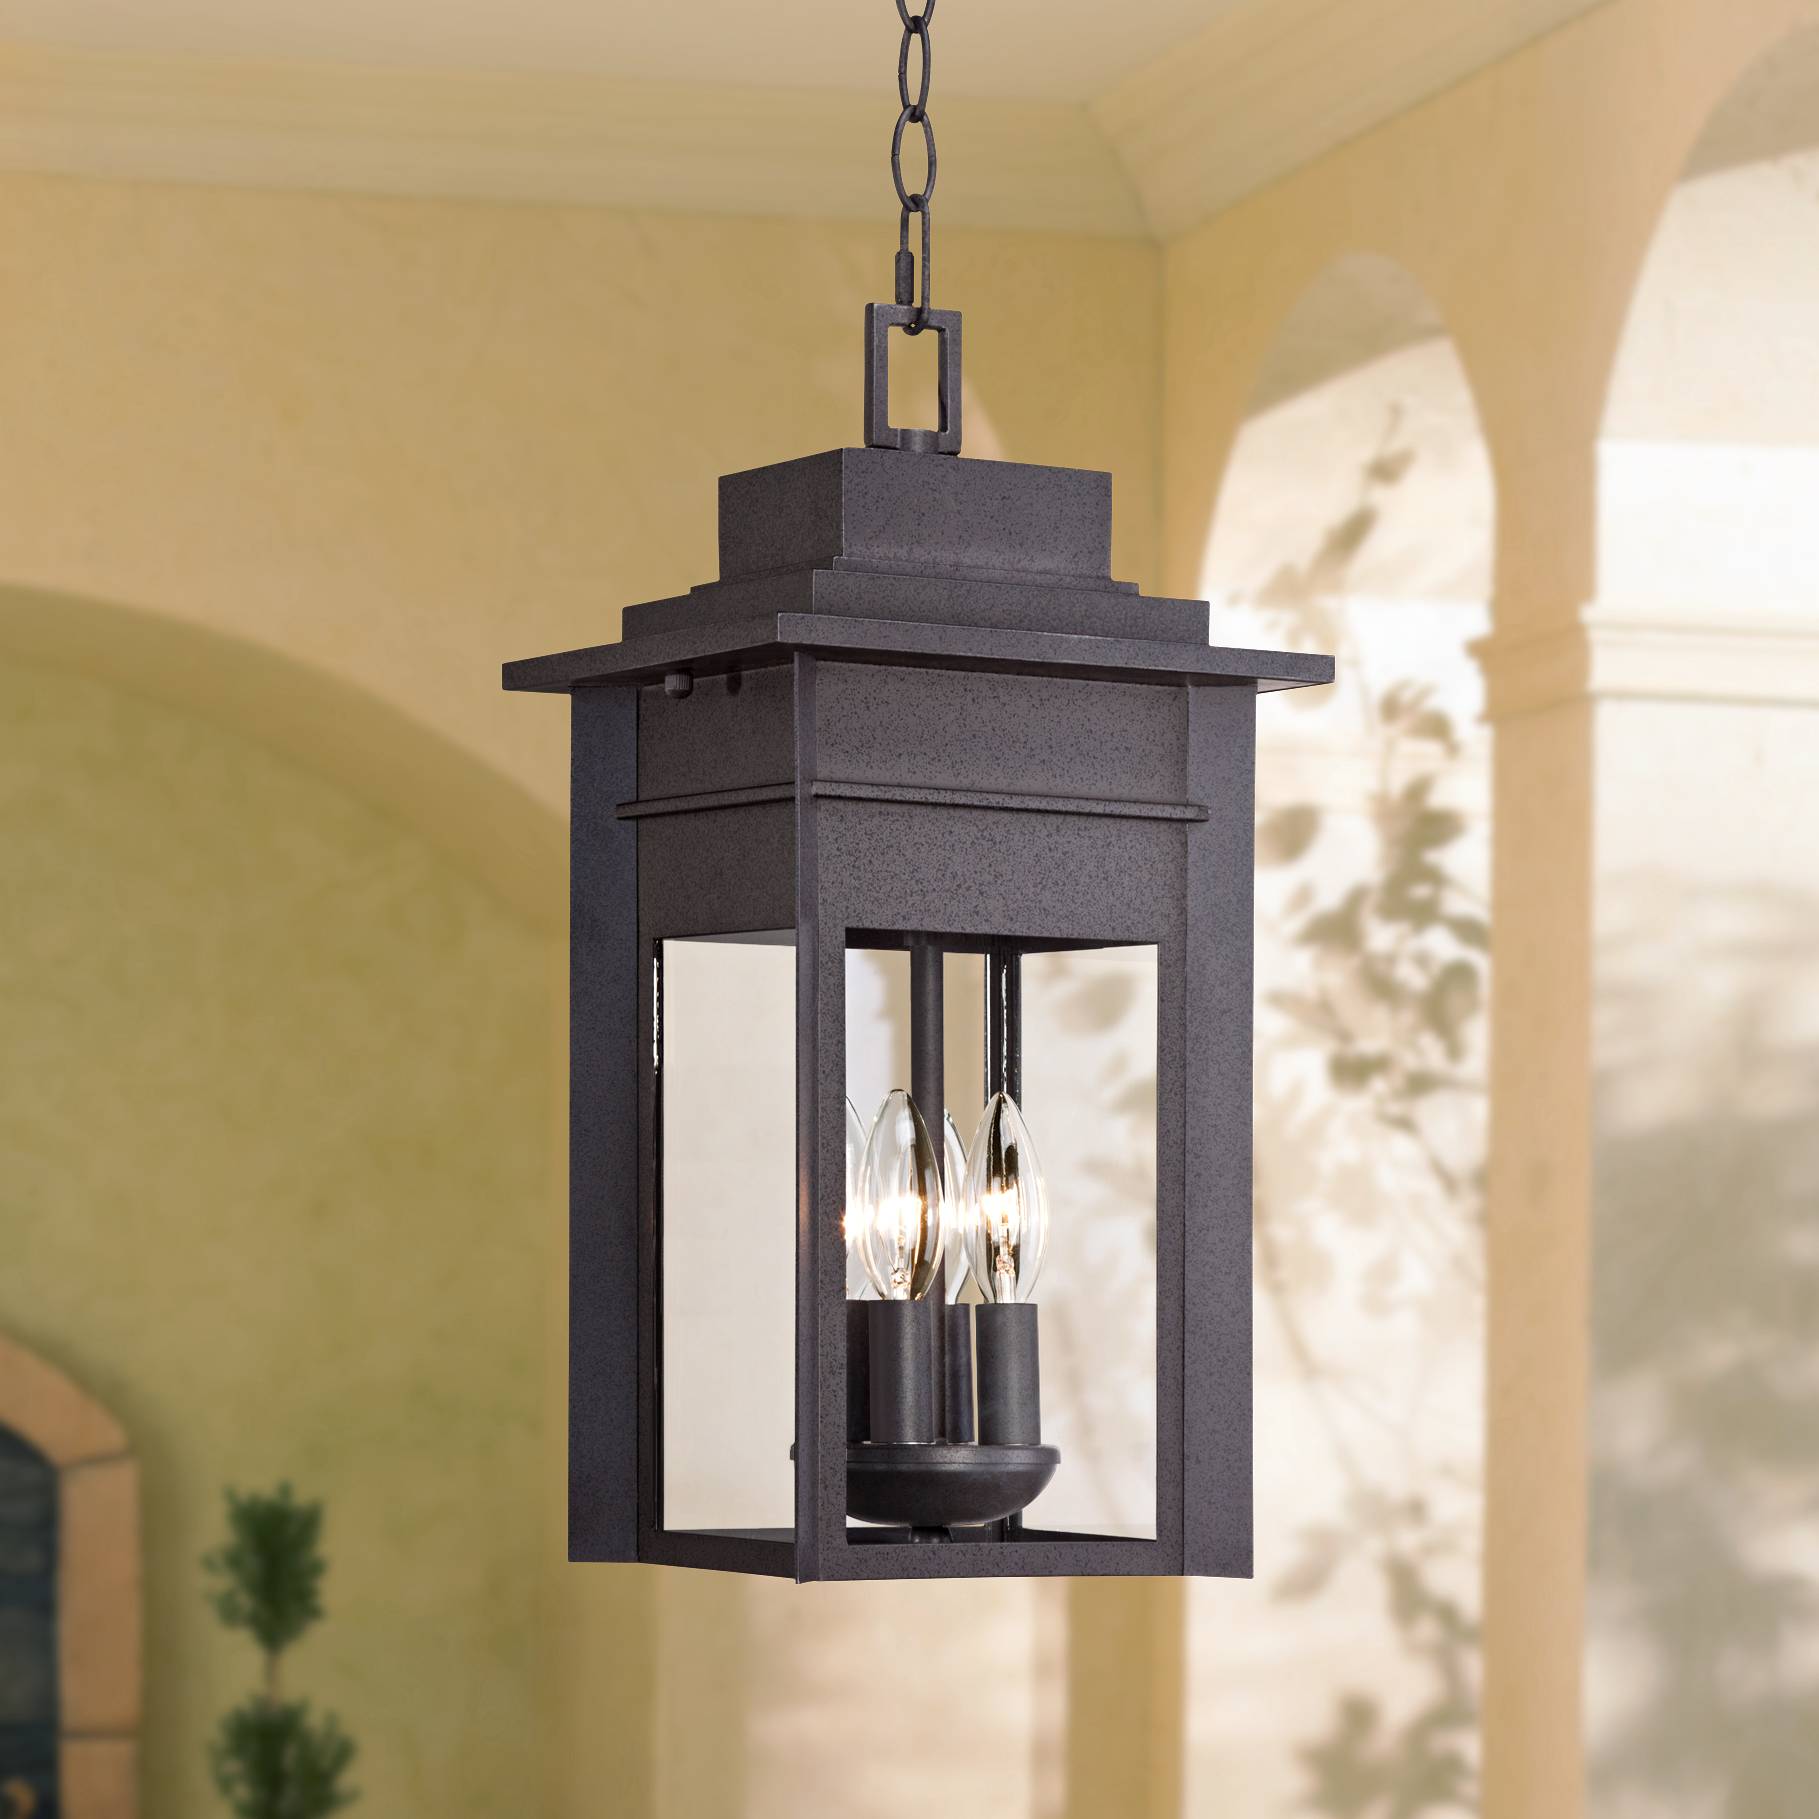 Details About Outdoor Ceiling Light Hanging Black Specked Gray 17 1 2 Exterior Porch Patio